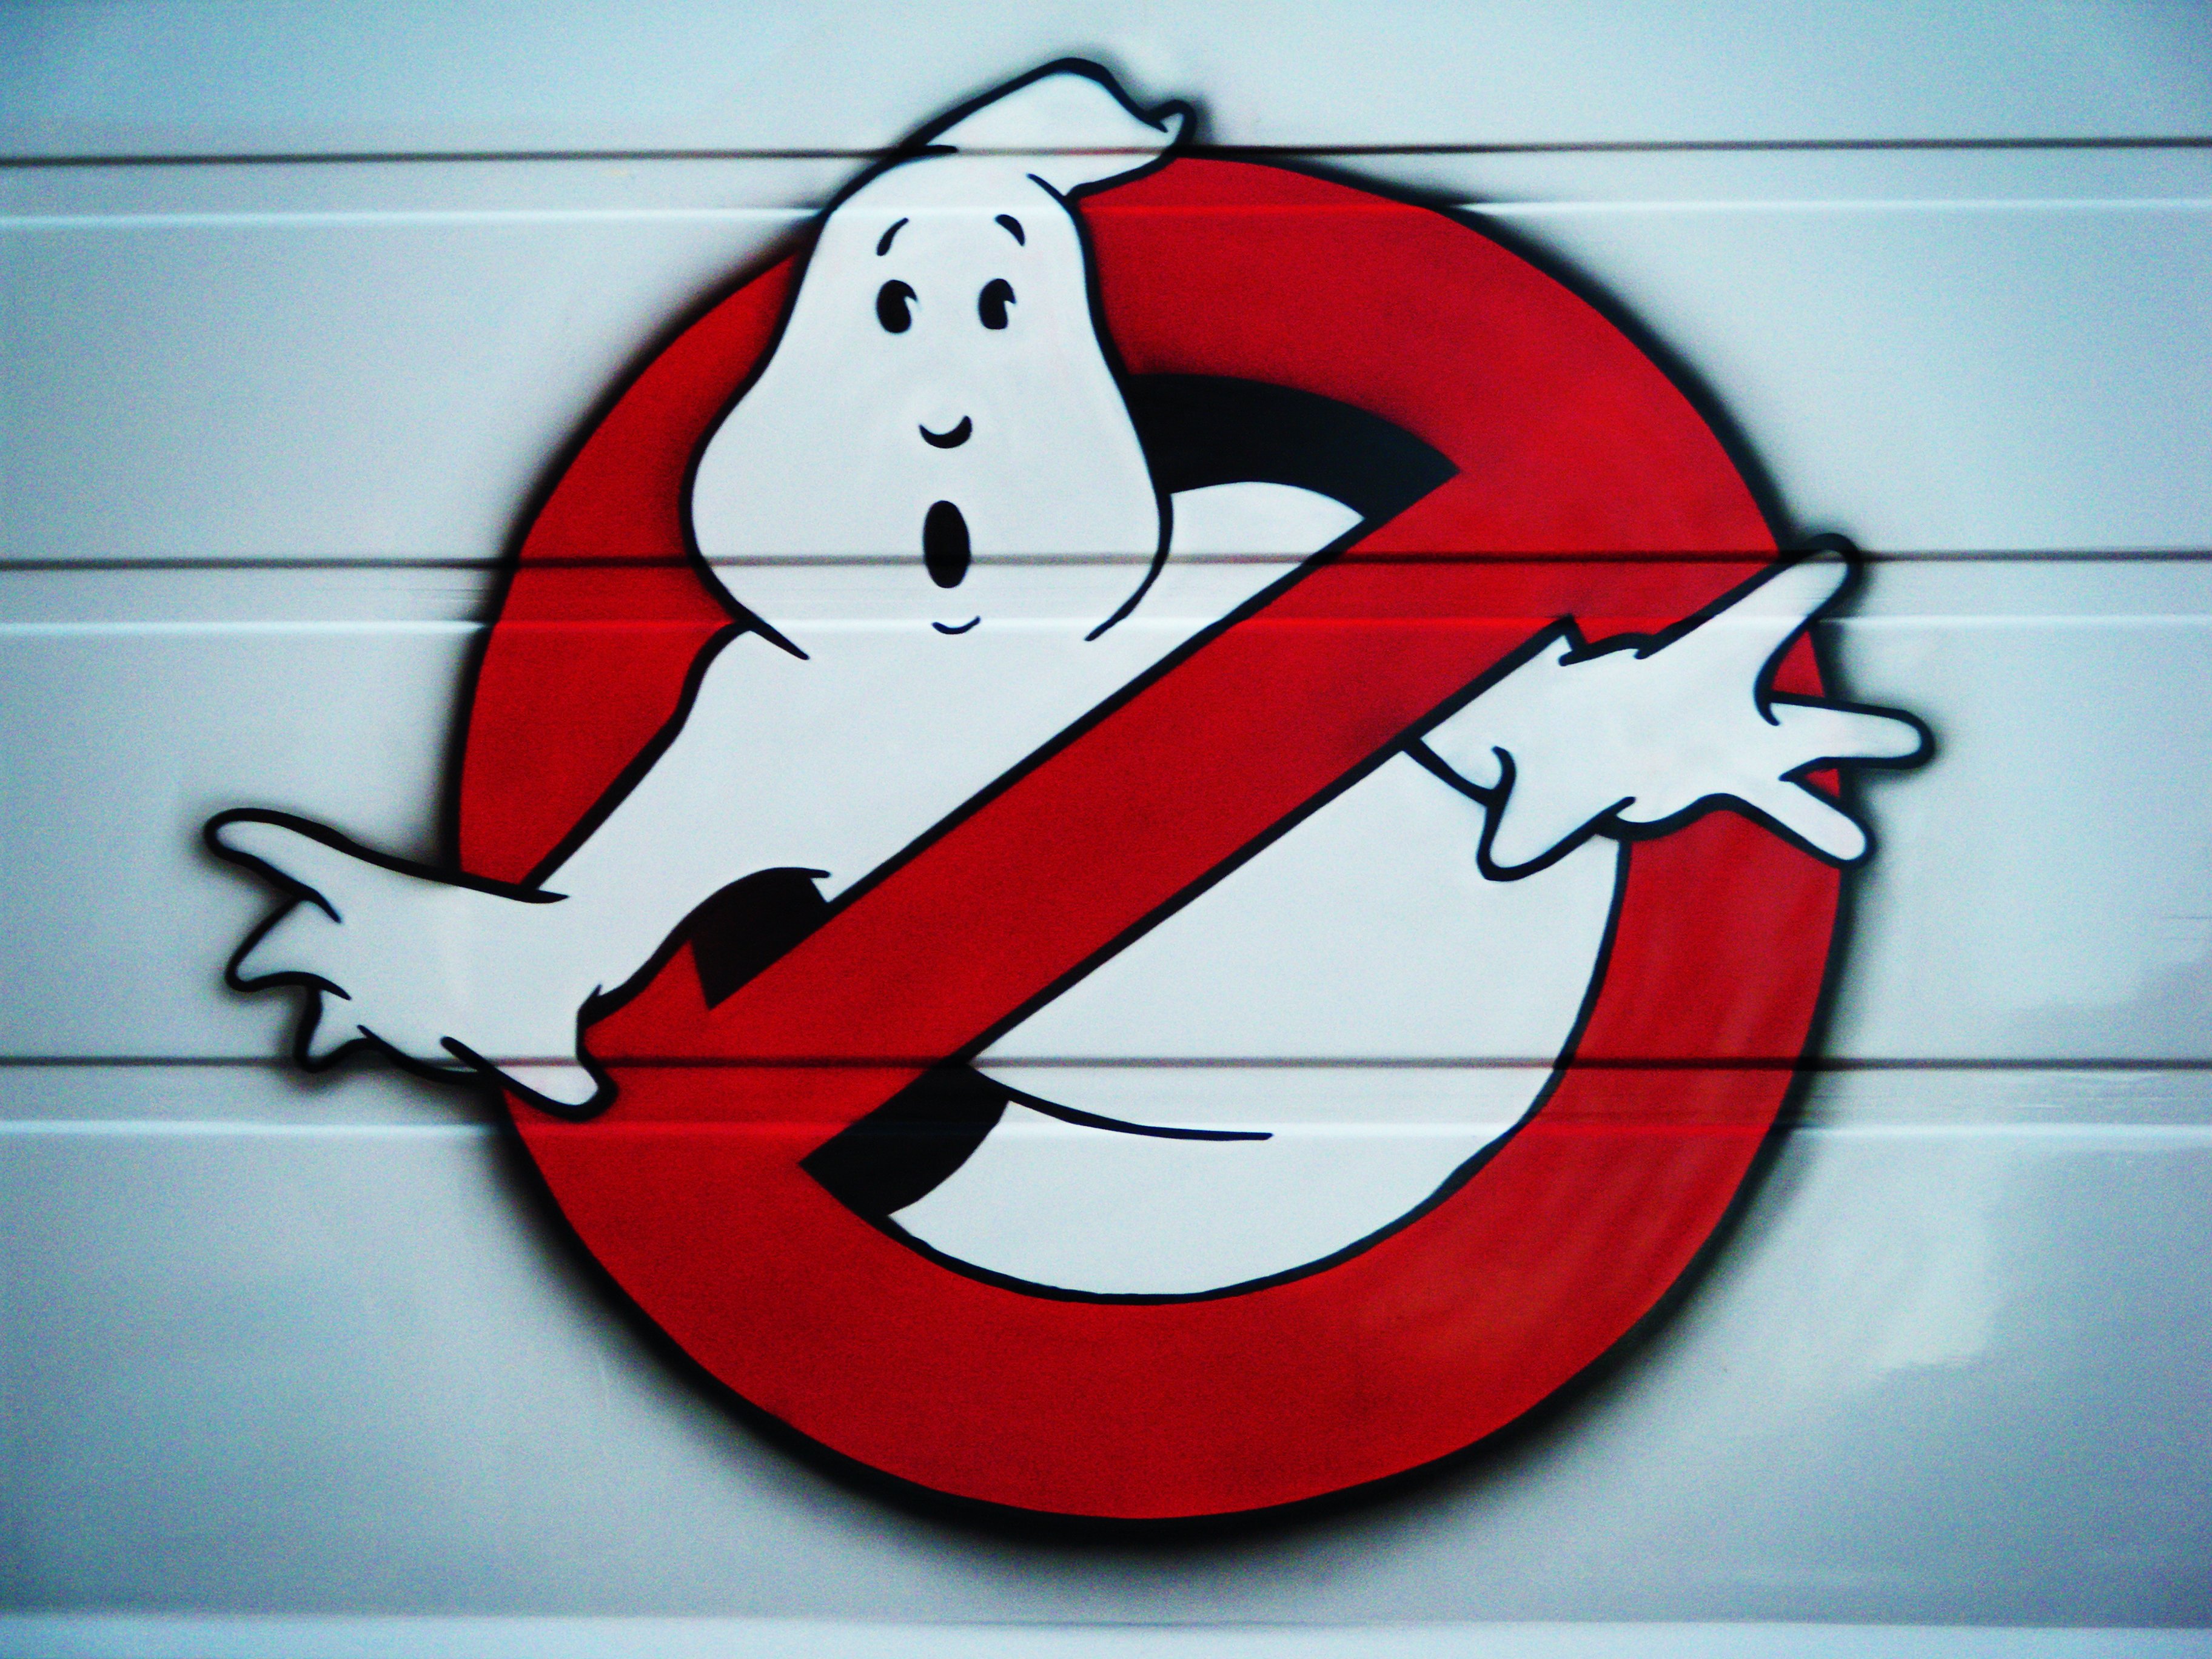 Download hd wallpapers of 529789-ghostbusters, Action, Adventure, Supernatu...